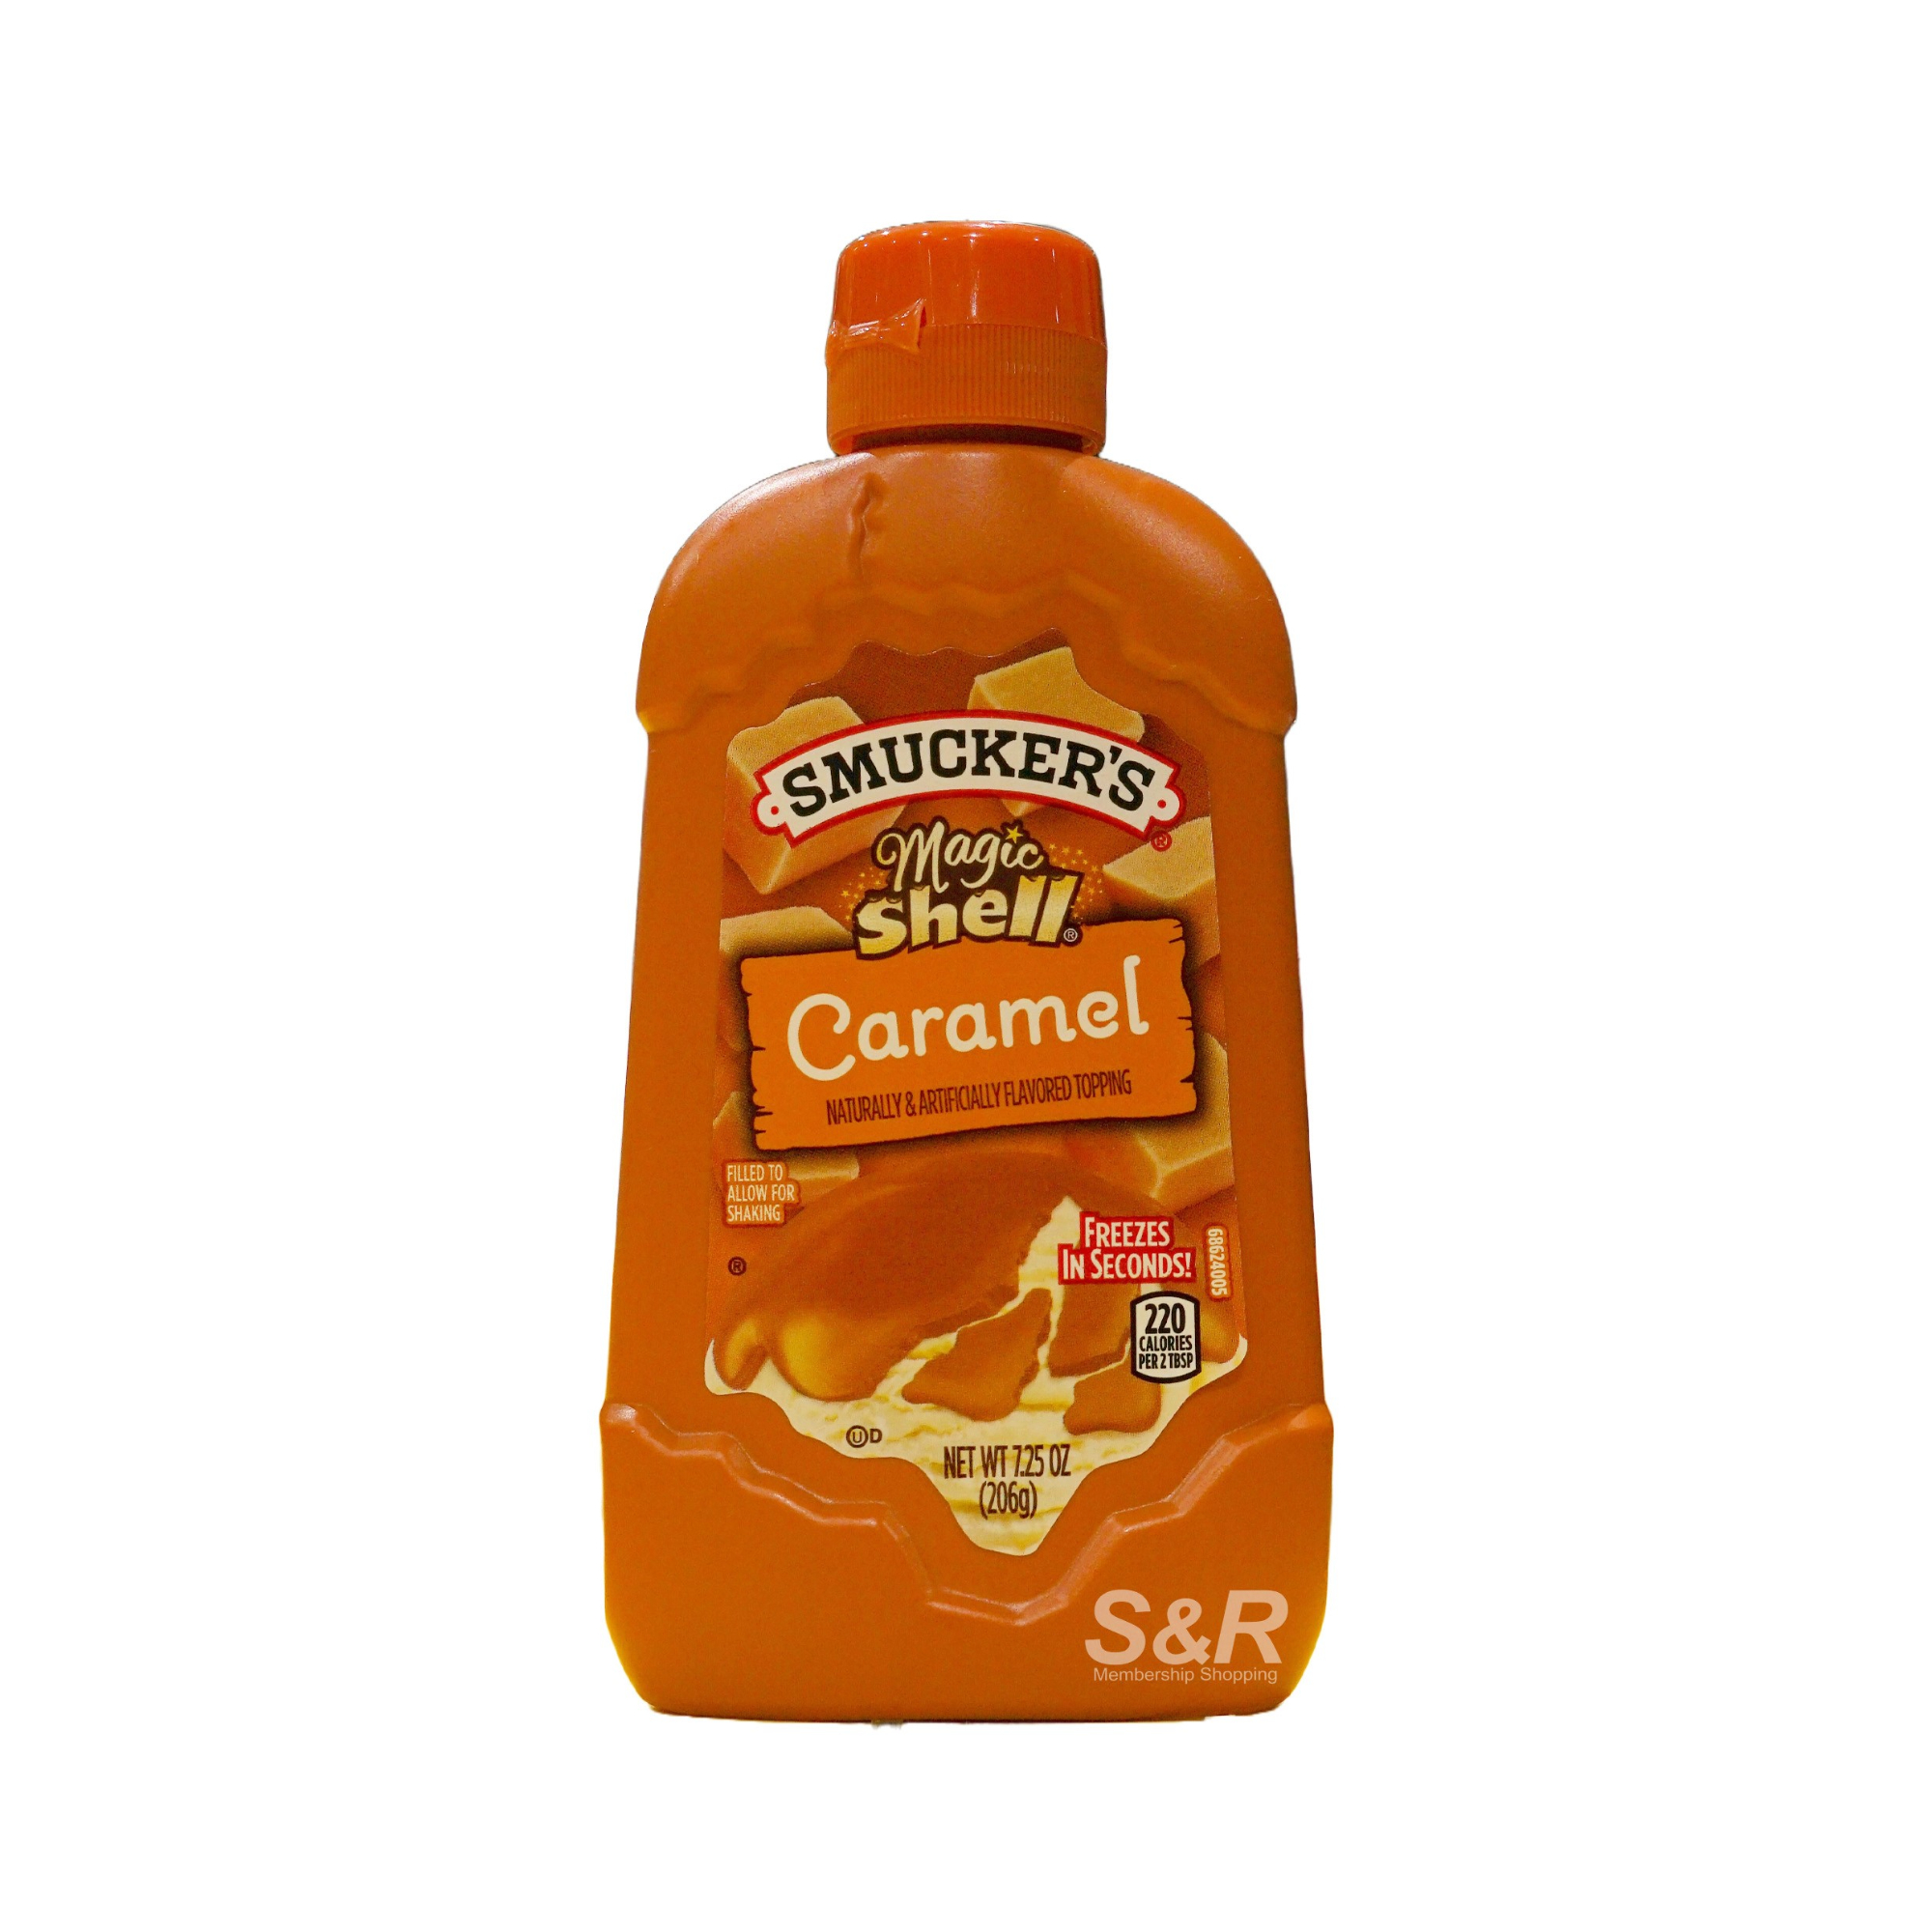 Smucker's Magic Shell Caramel Flavored Topping 206g